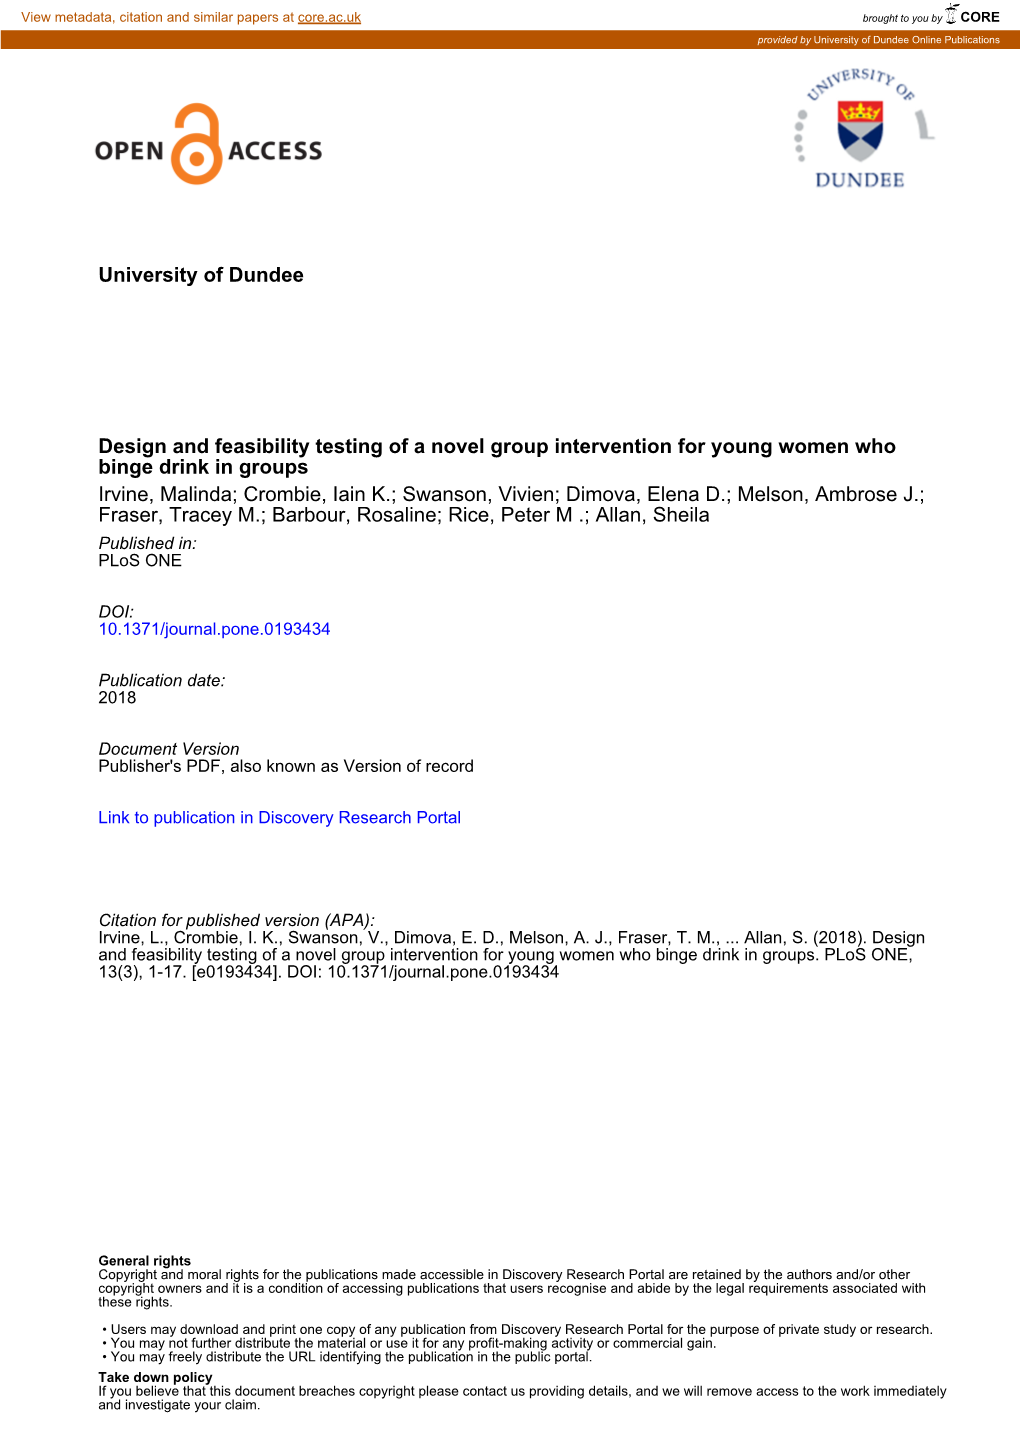 University of Dundee Design and Feasibility Testing of a Novel Group